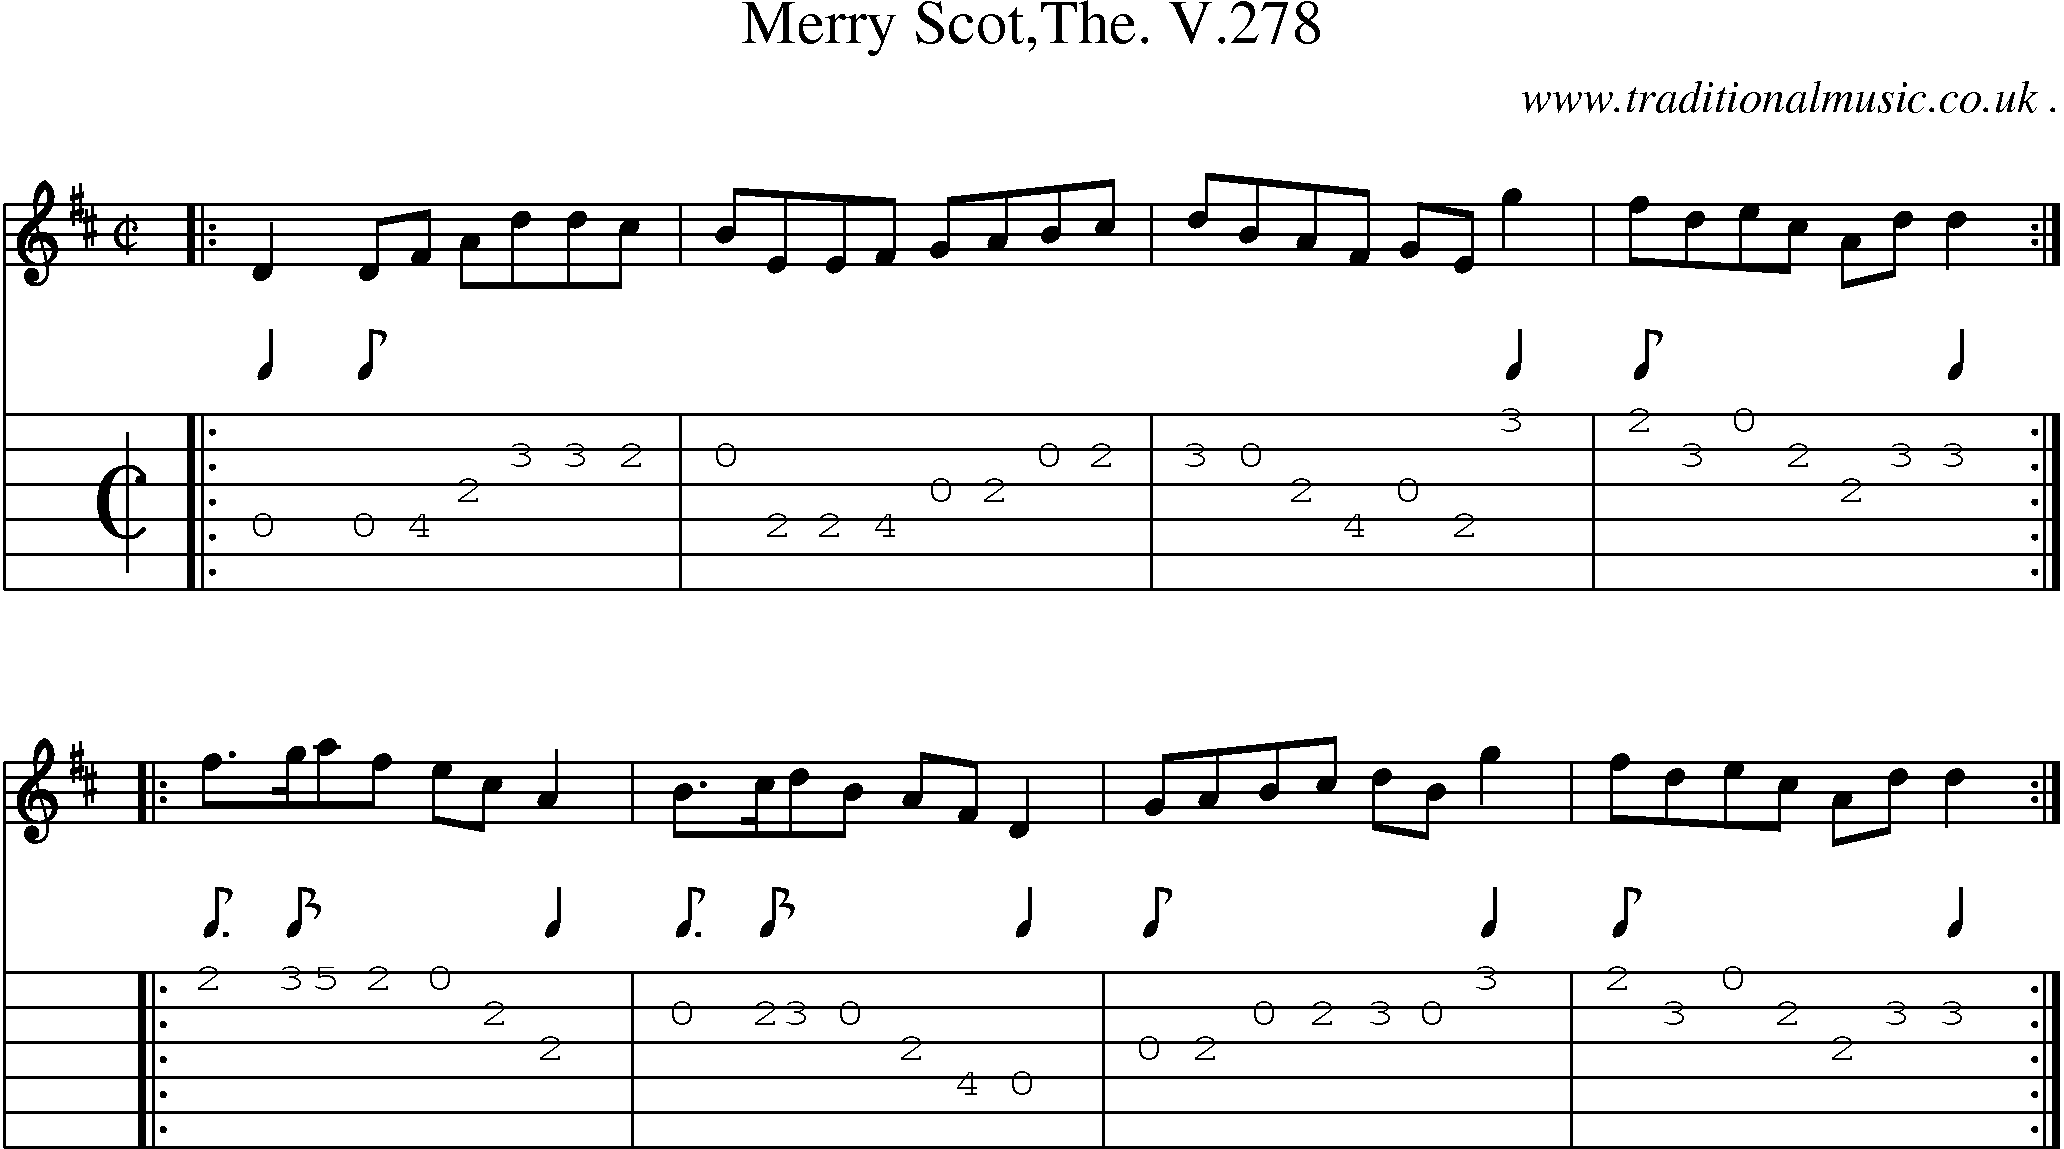 Sheet-music  score, Chords and Guitar Tabs for Merry Scotthe V278